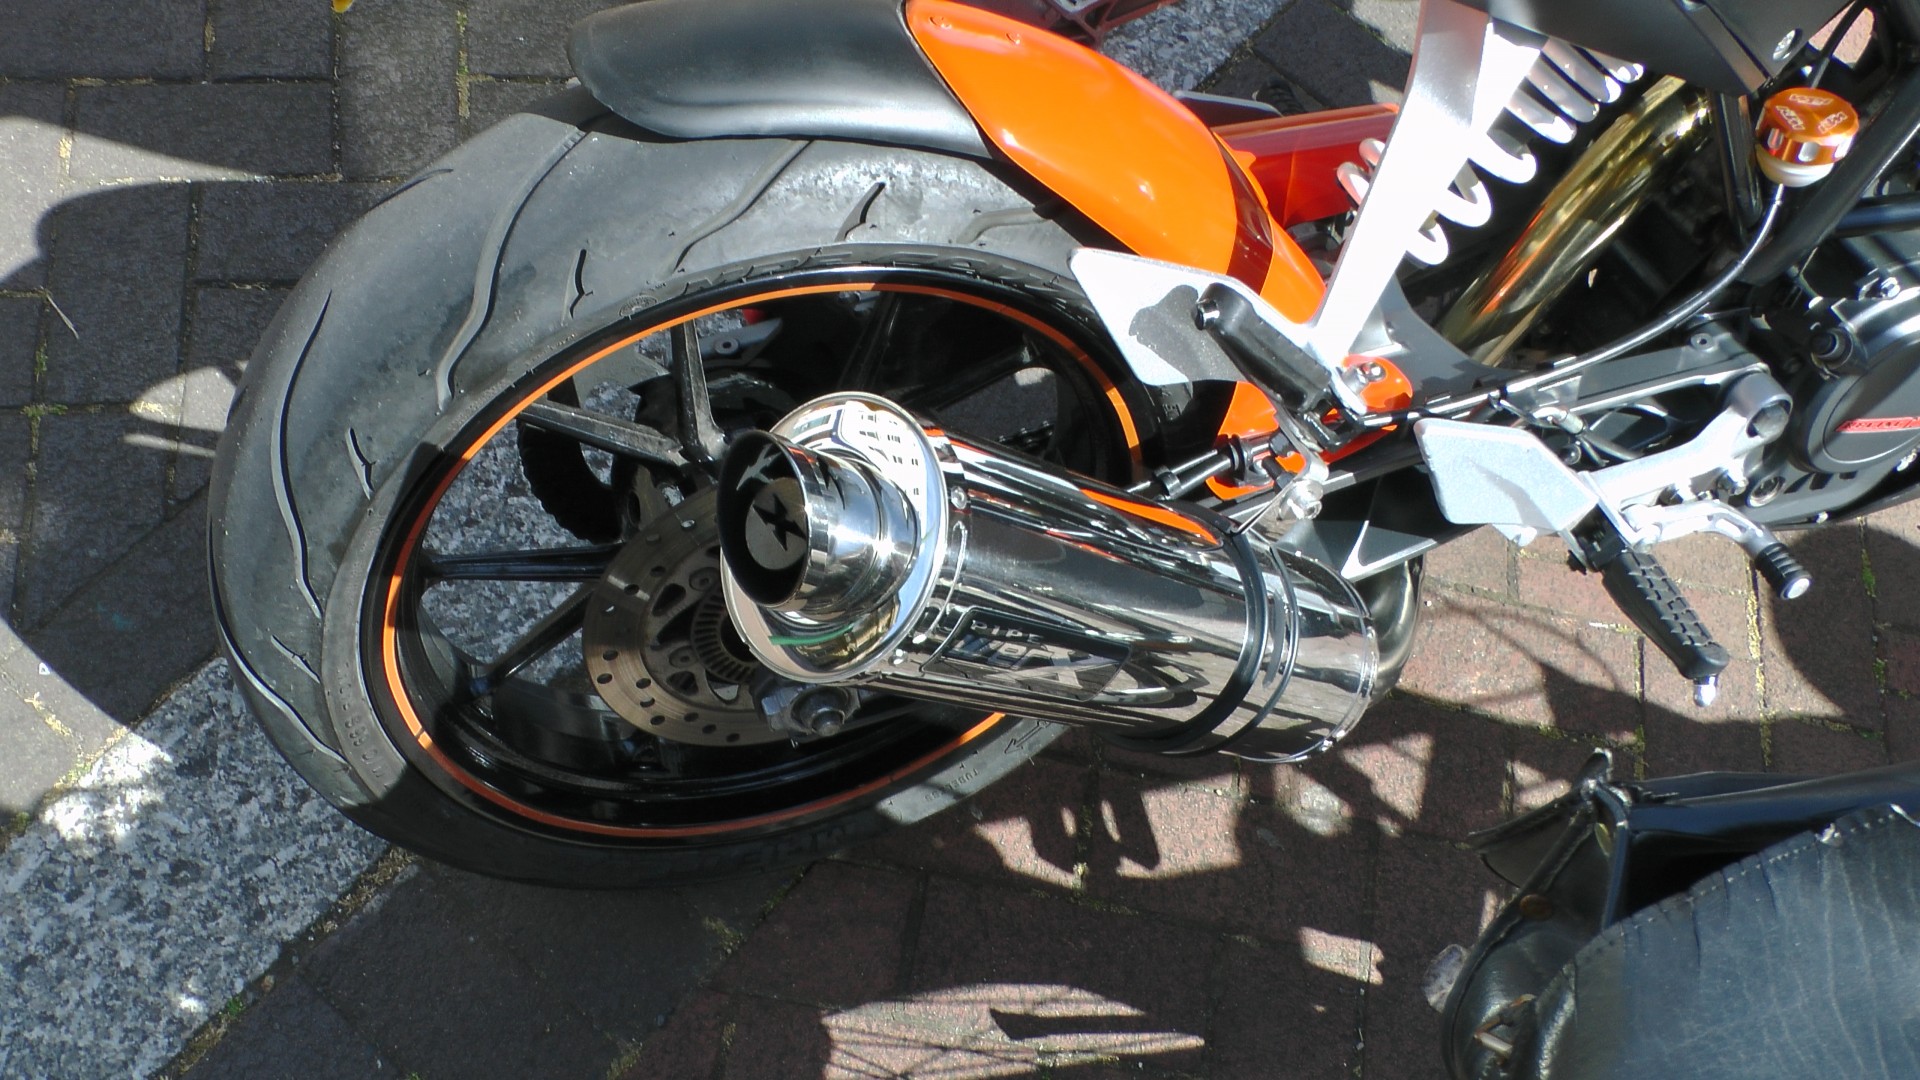 KTM Duke Motorcycle Rear Wheel And Exhaust Pipe